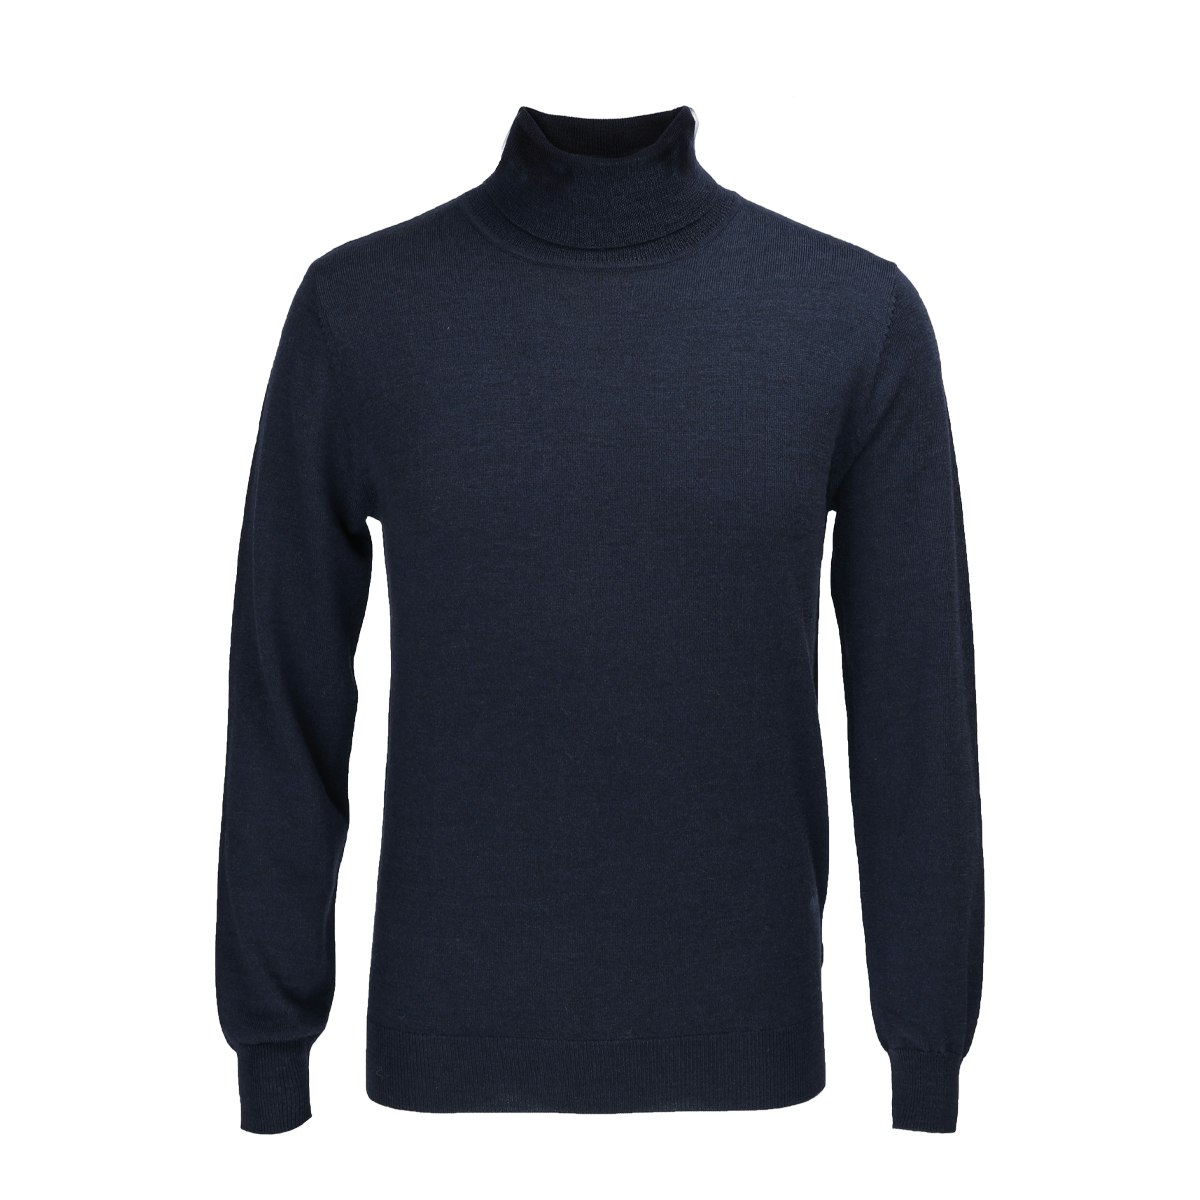 The Valentino Navy Wool Roll Neck Knit